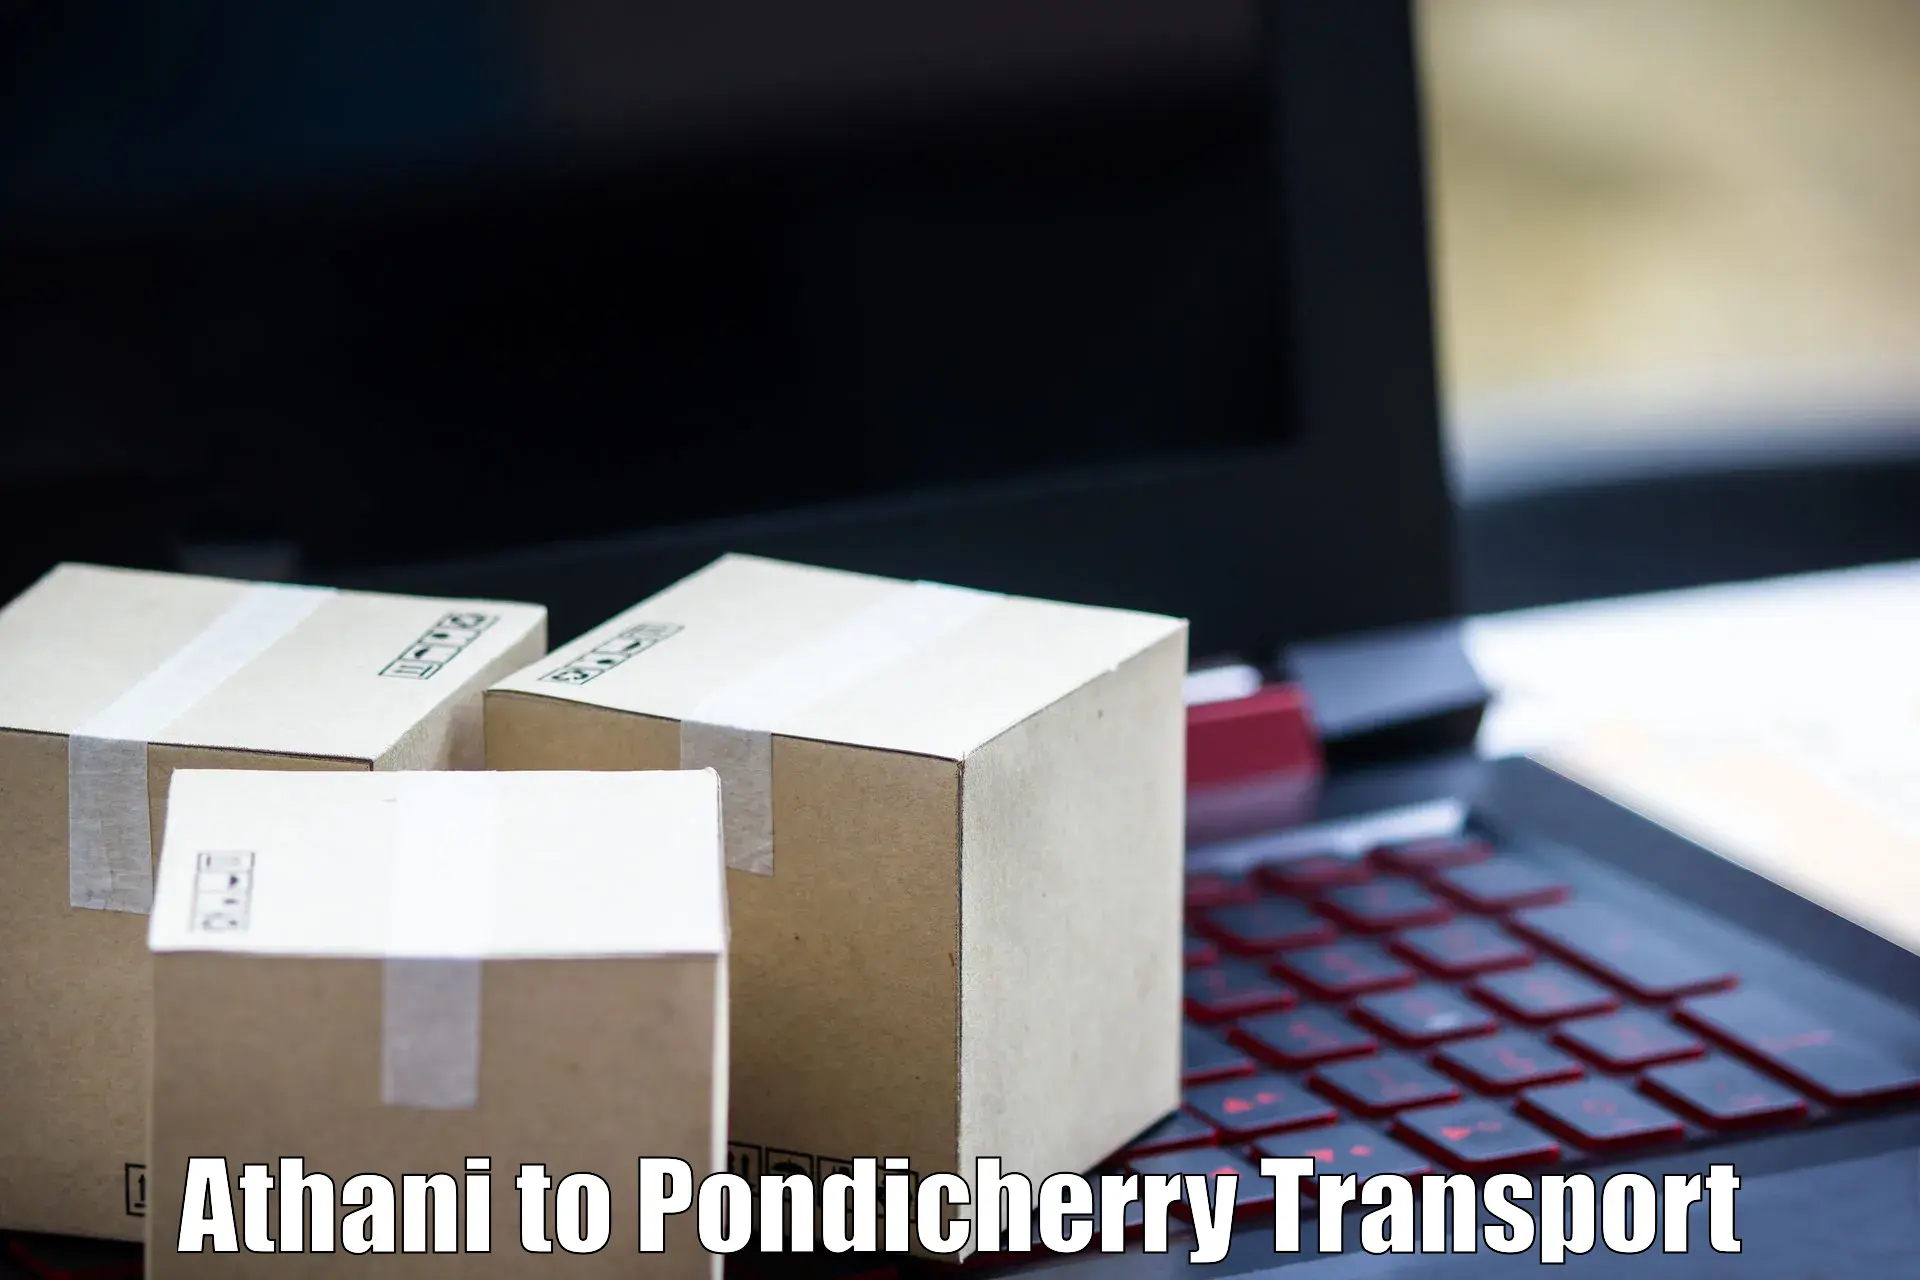 Express transport services Athani to Pondicherry